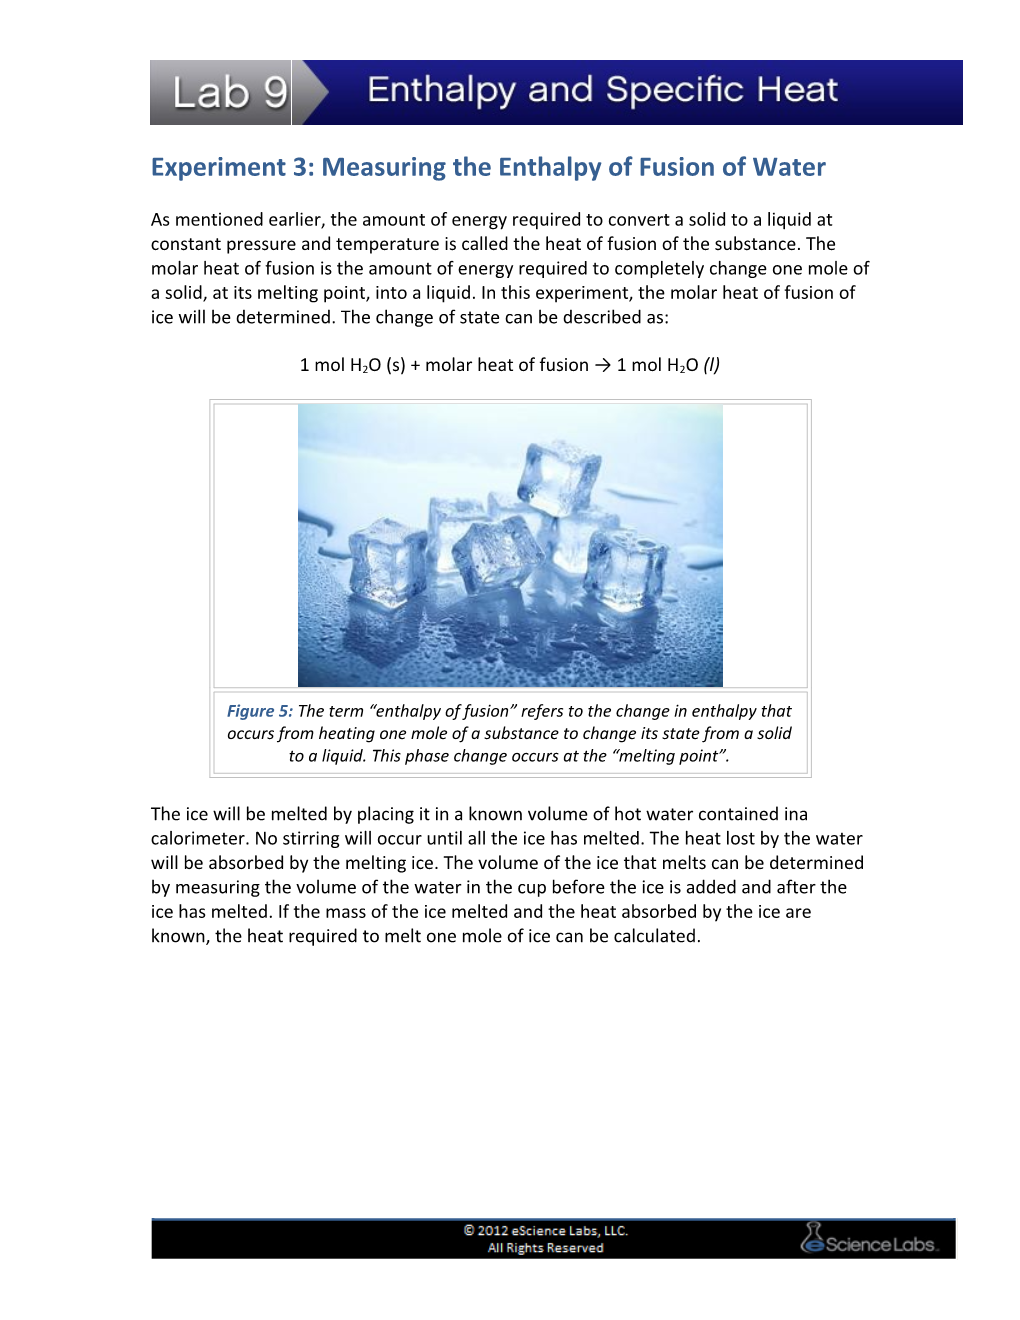 Experiment 3: Measuring the Enthalpy of Fusion of Water